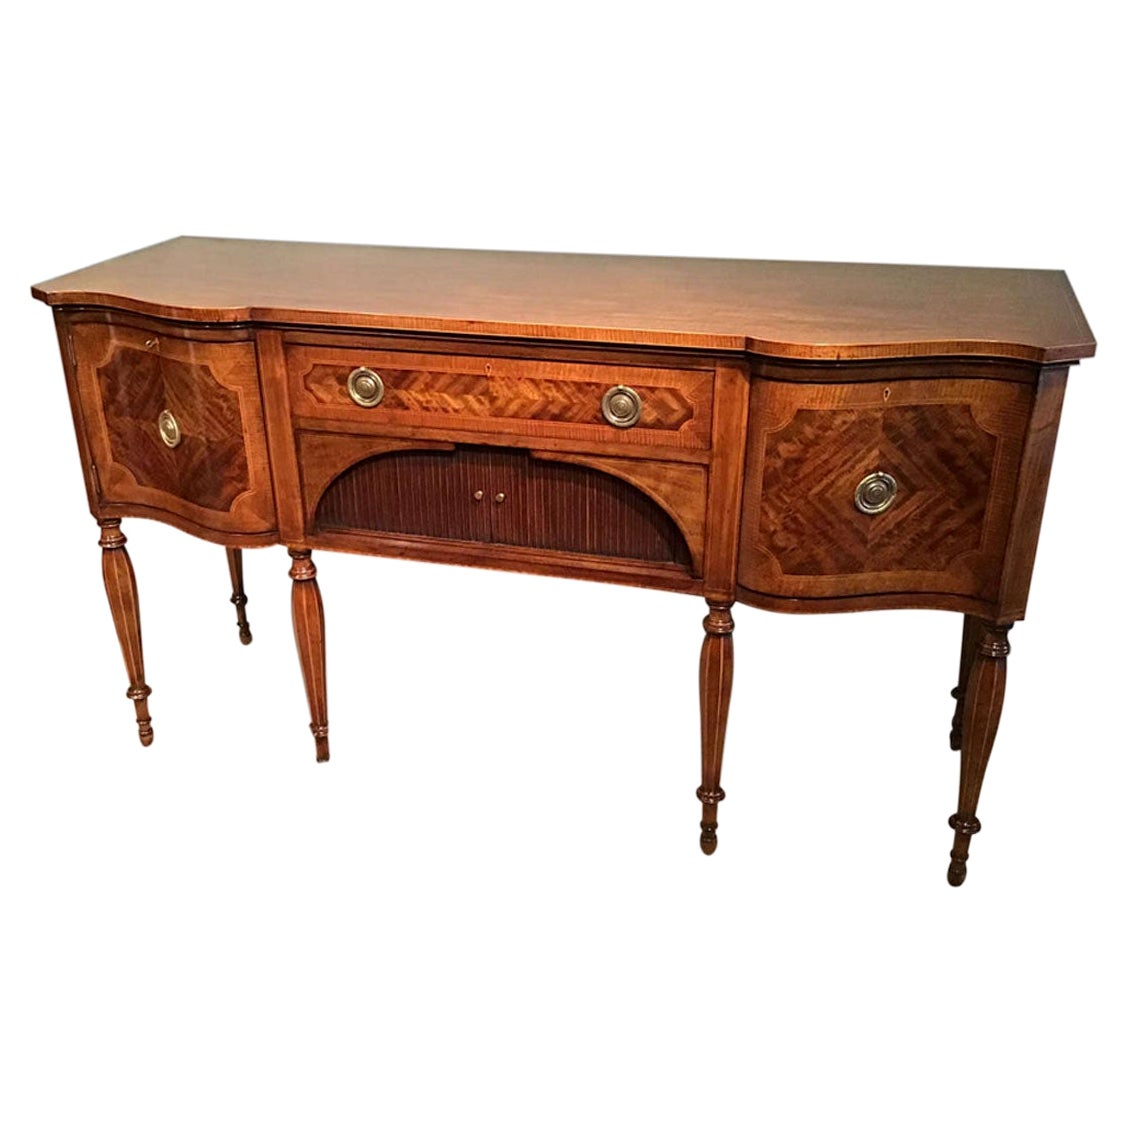 Antique English Mahogany Sideboard with Satinwood Inlay For Sale